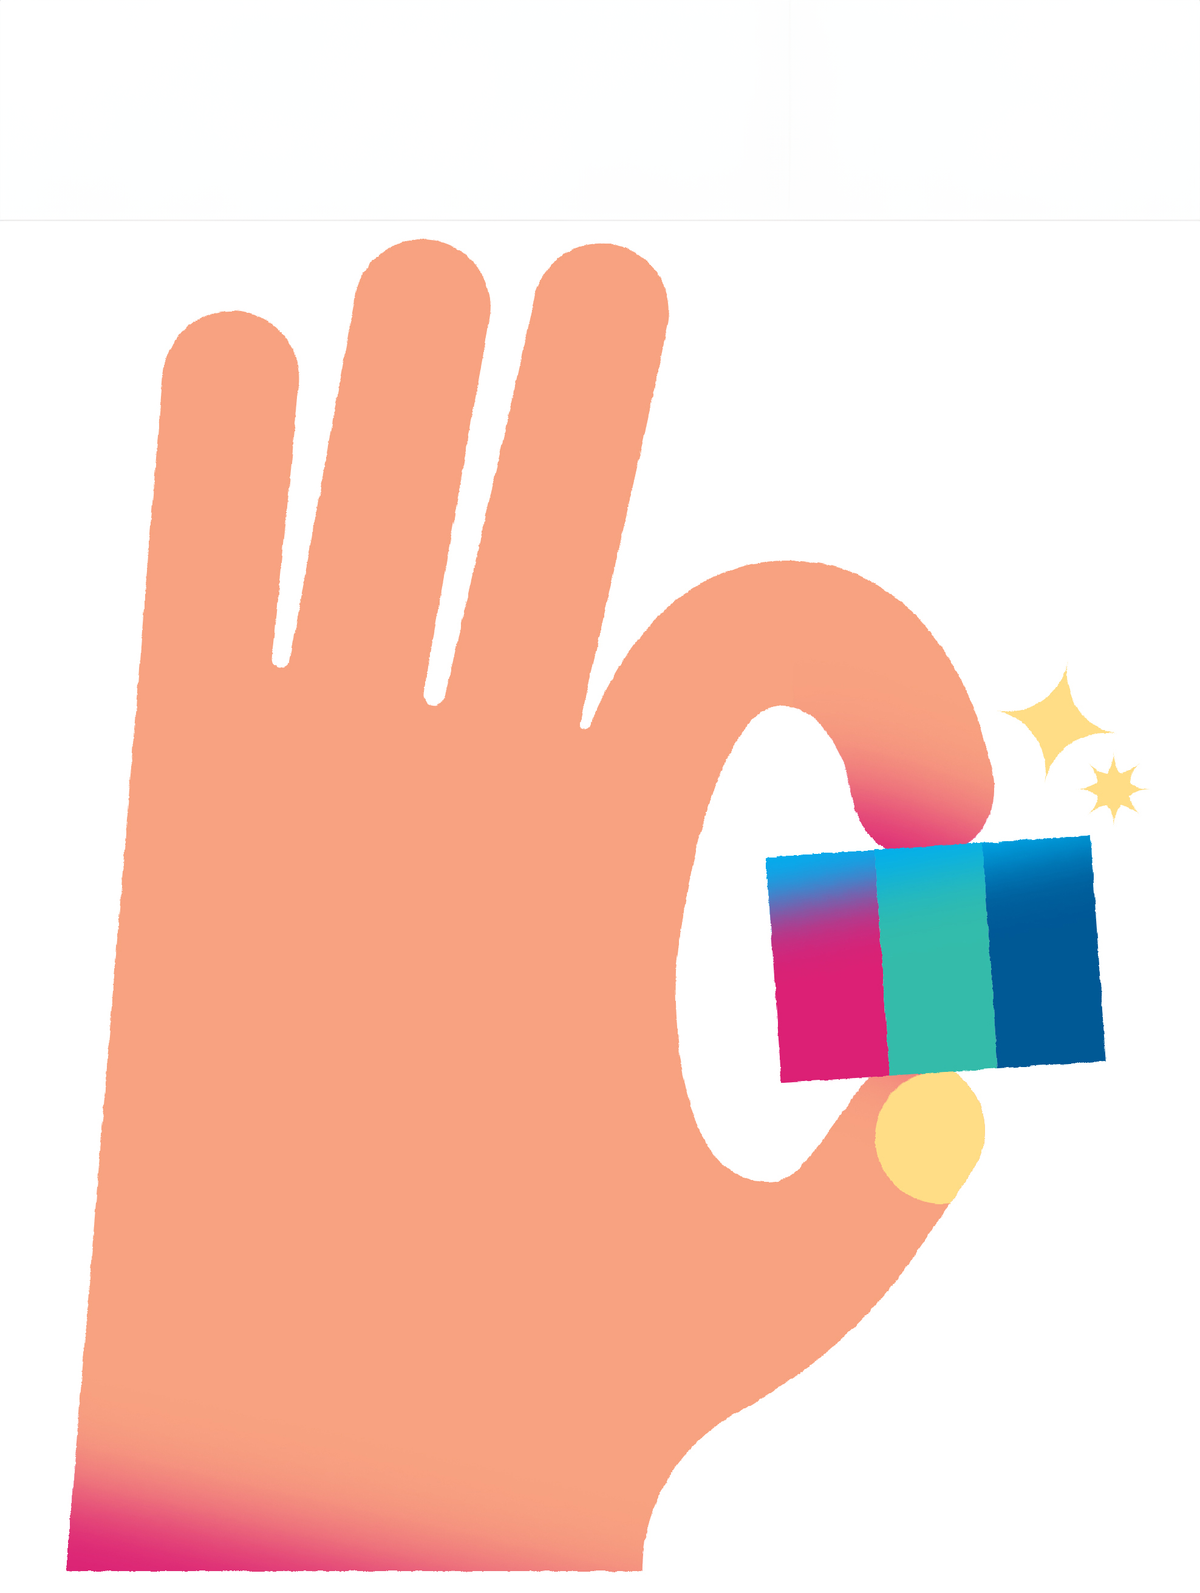 An illustration of a hand holding a 3 colored square.  